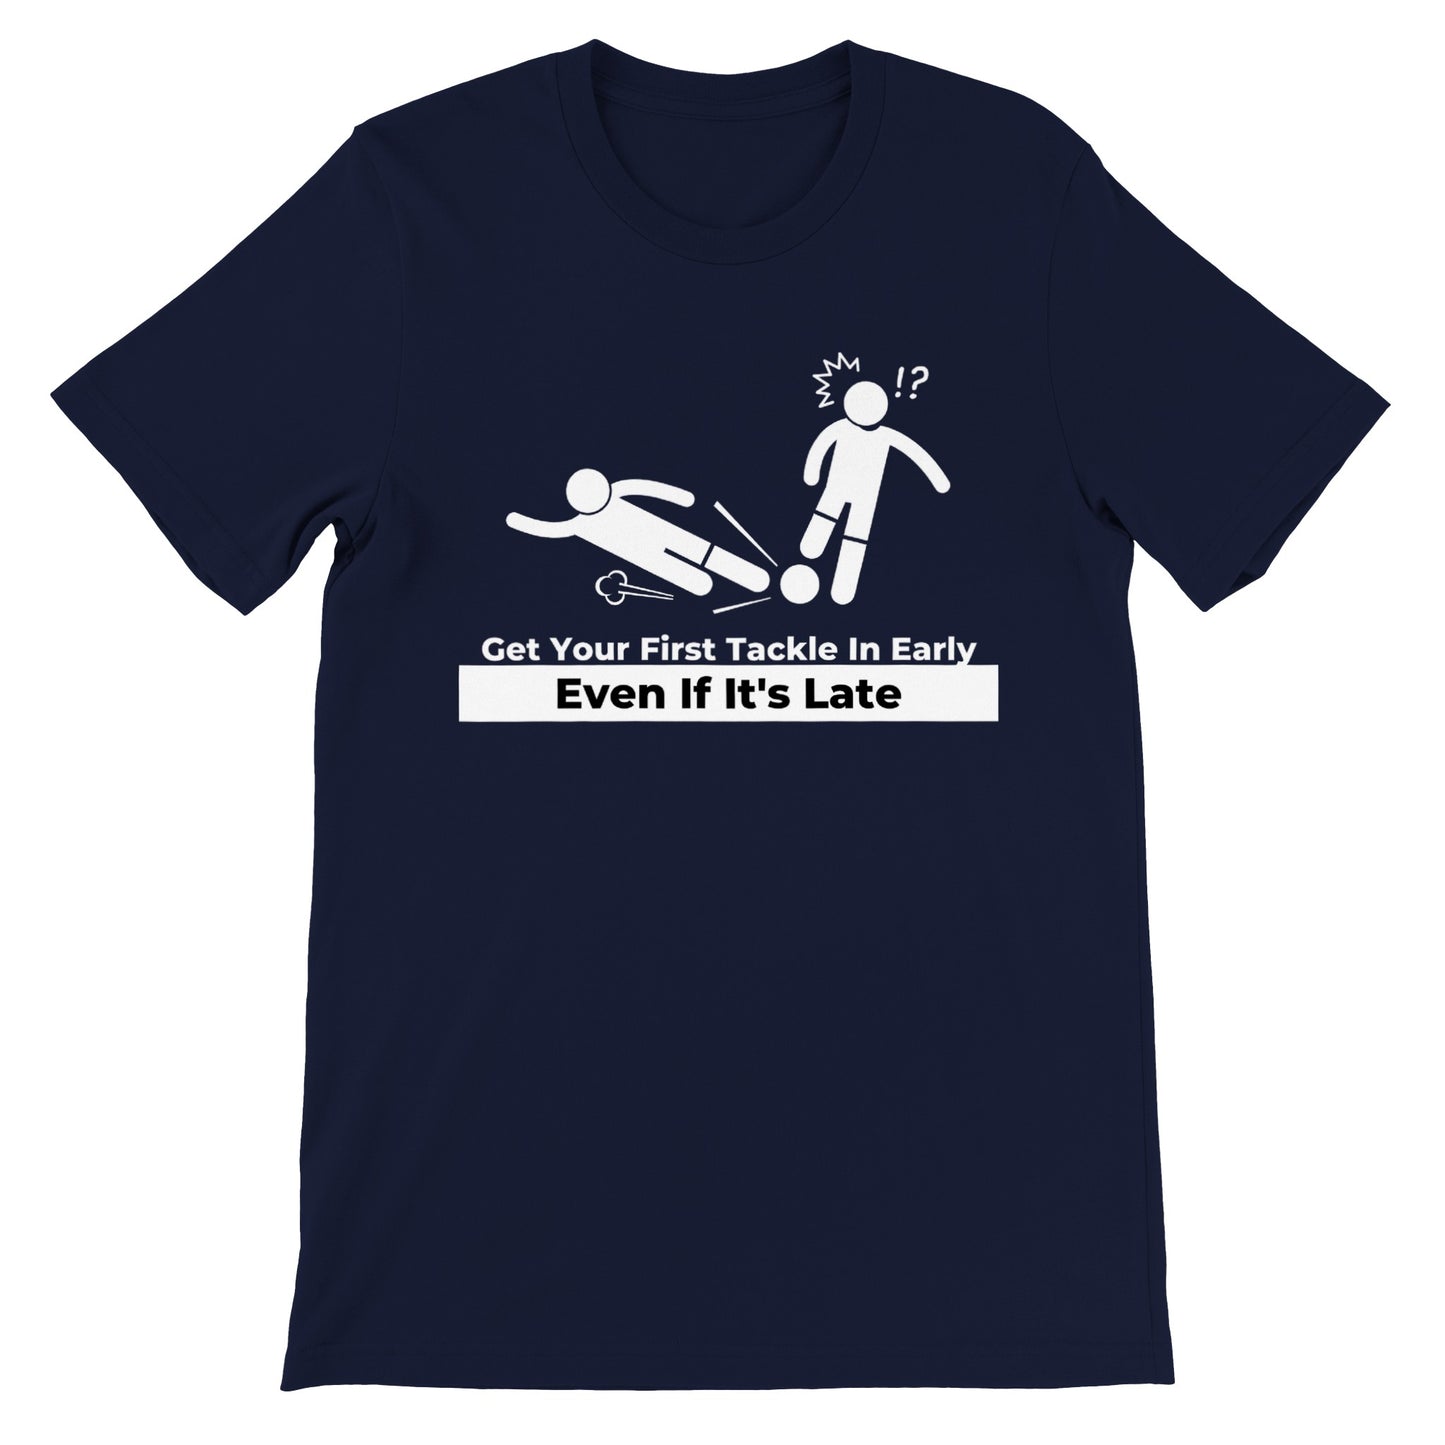 Get Your First Tackle In Early Football/Soccer  - Premium Unisex Crewneck T-shirt